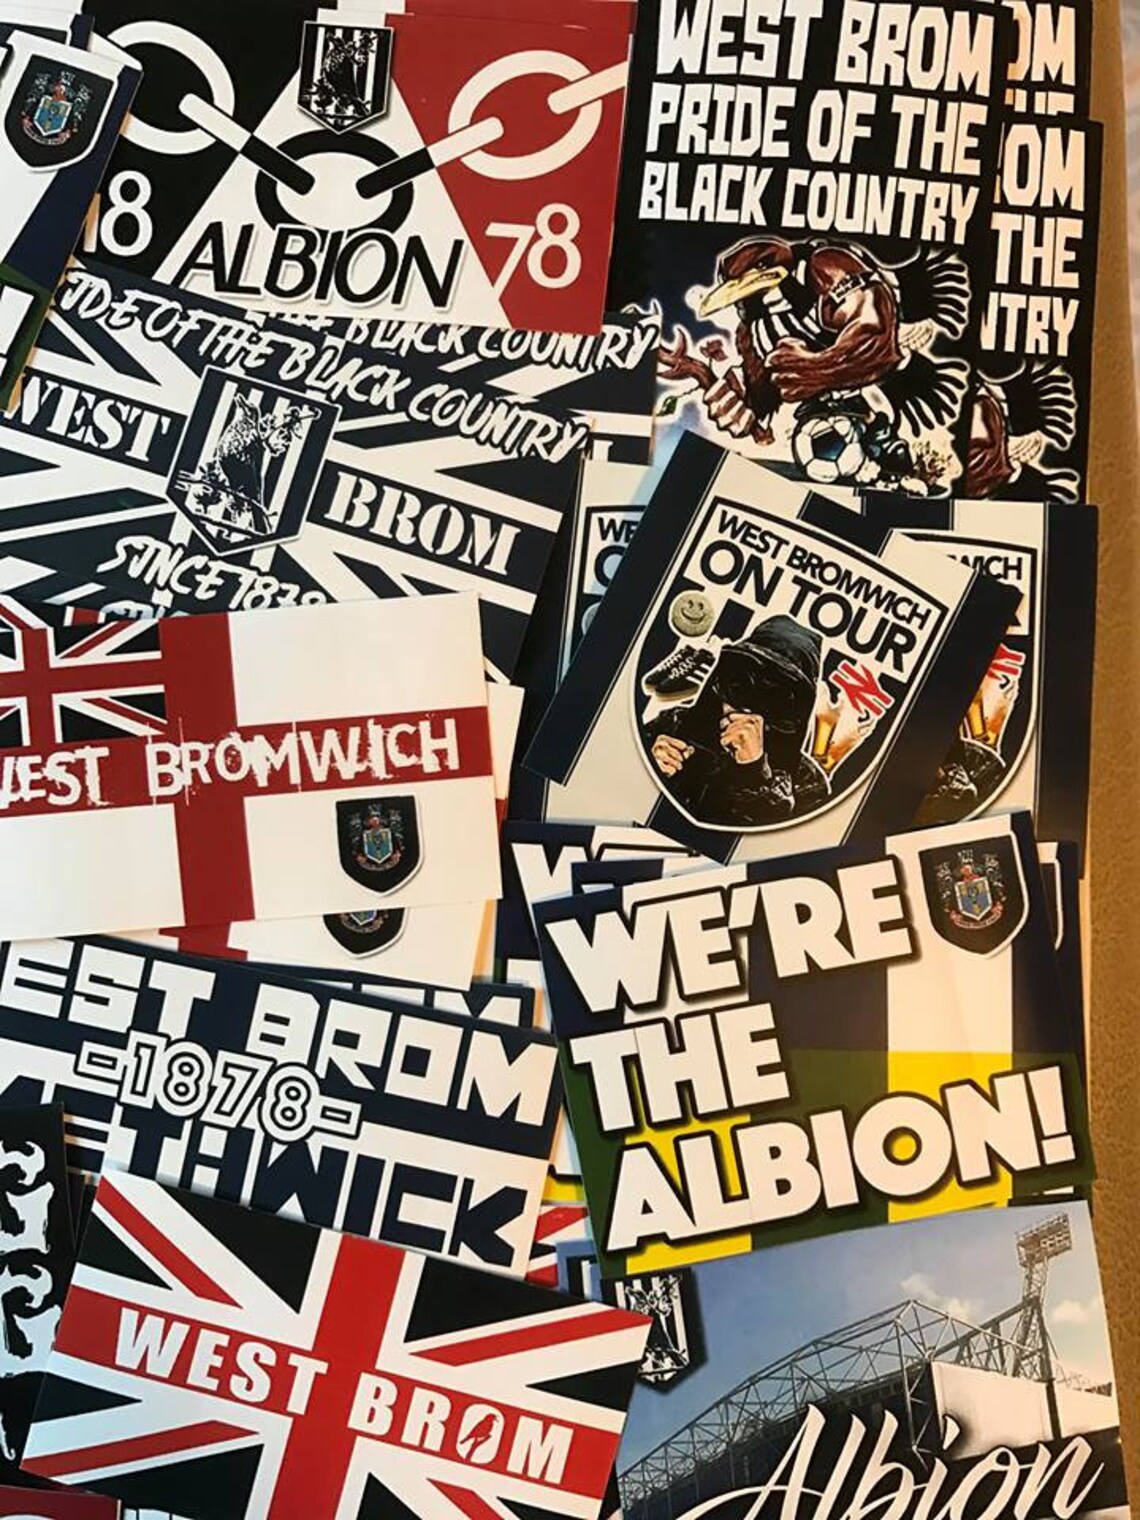 100 X West Bromwich Albion Stickers Based on Poster Shirt - Etsy